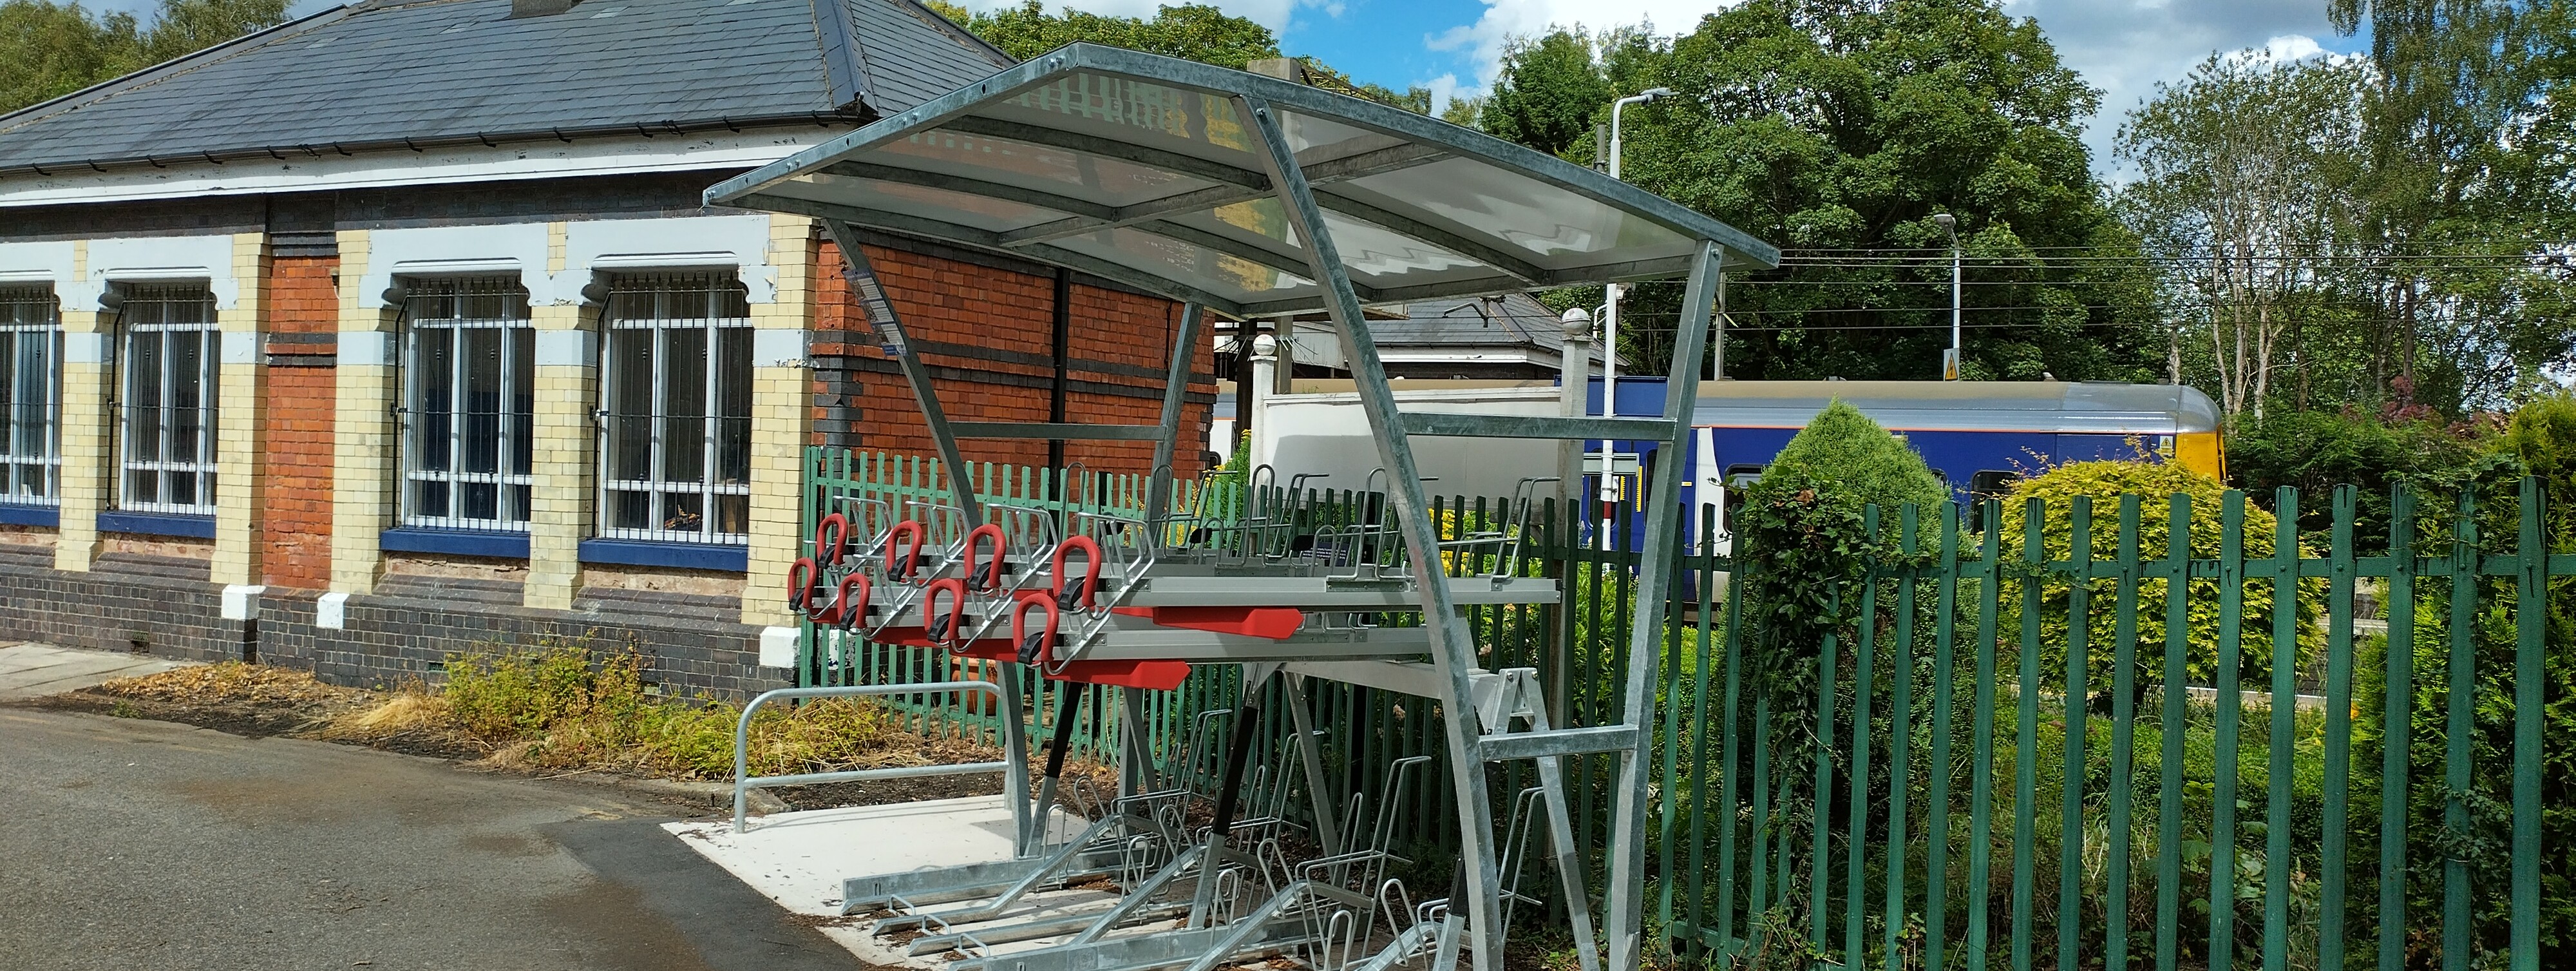 this-image-shows-new-cycle-parking-at-poyton-ready-for-use